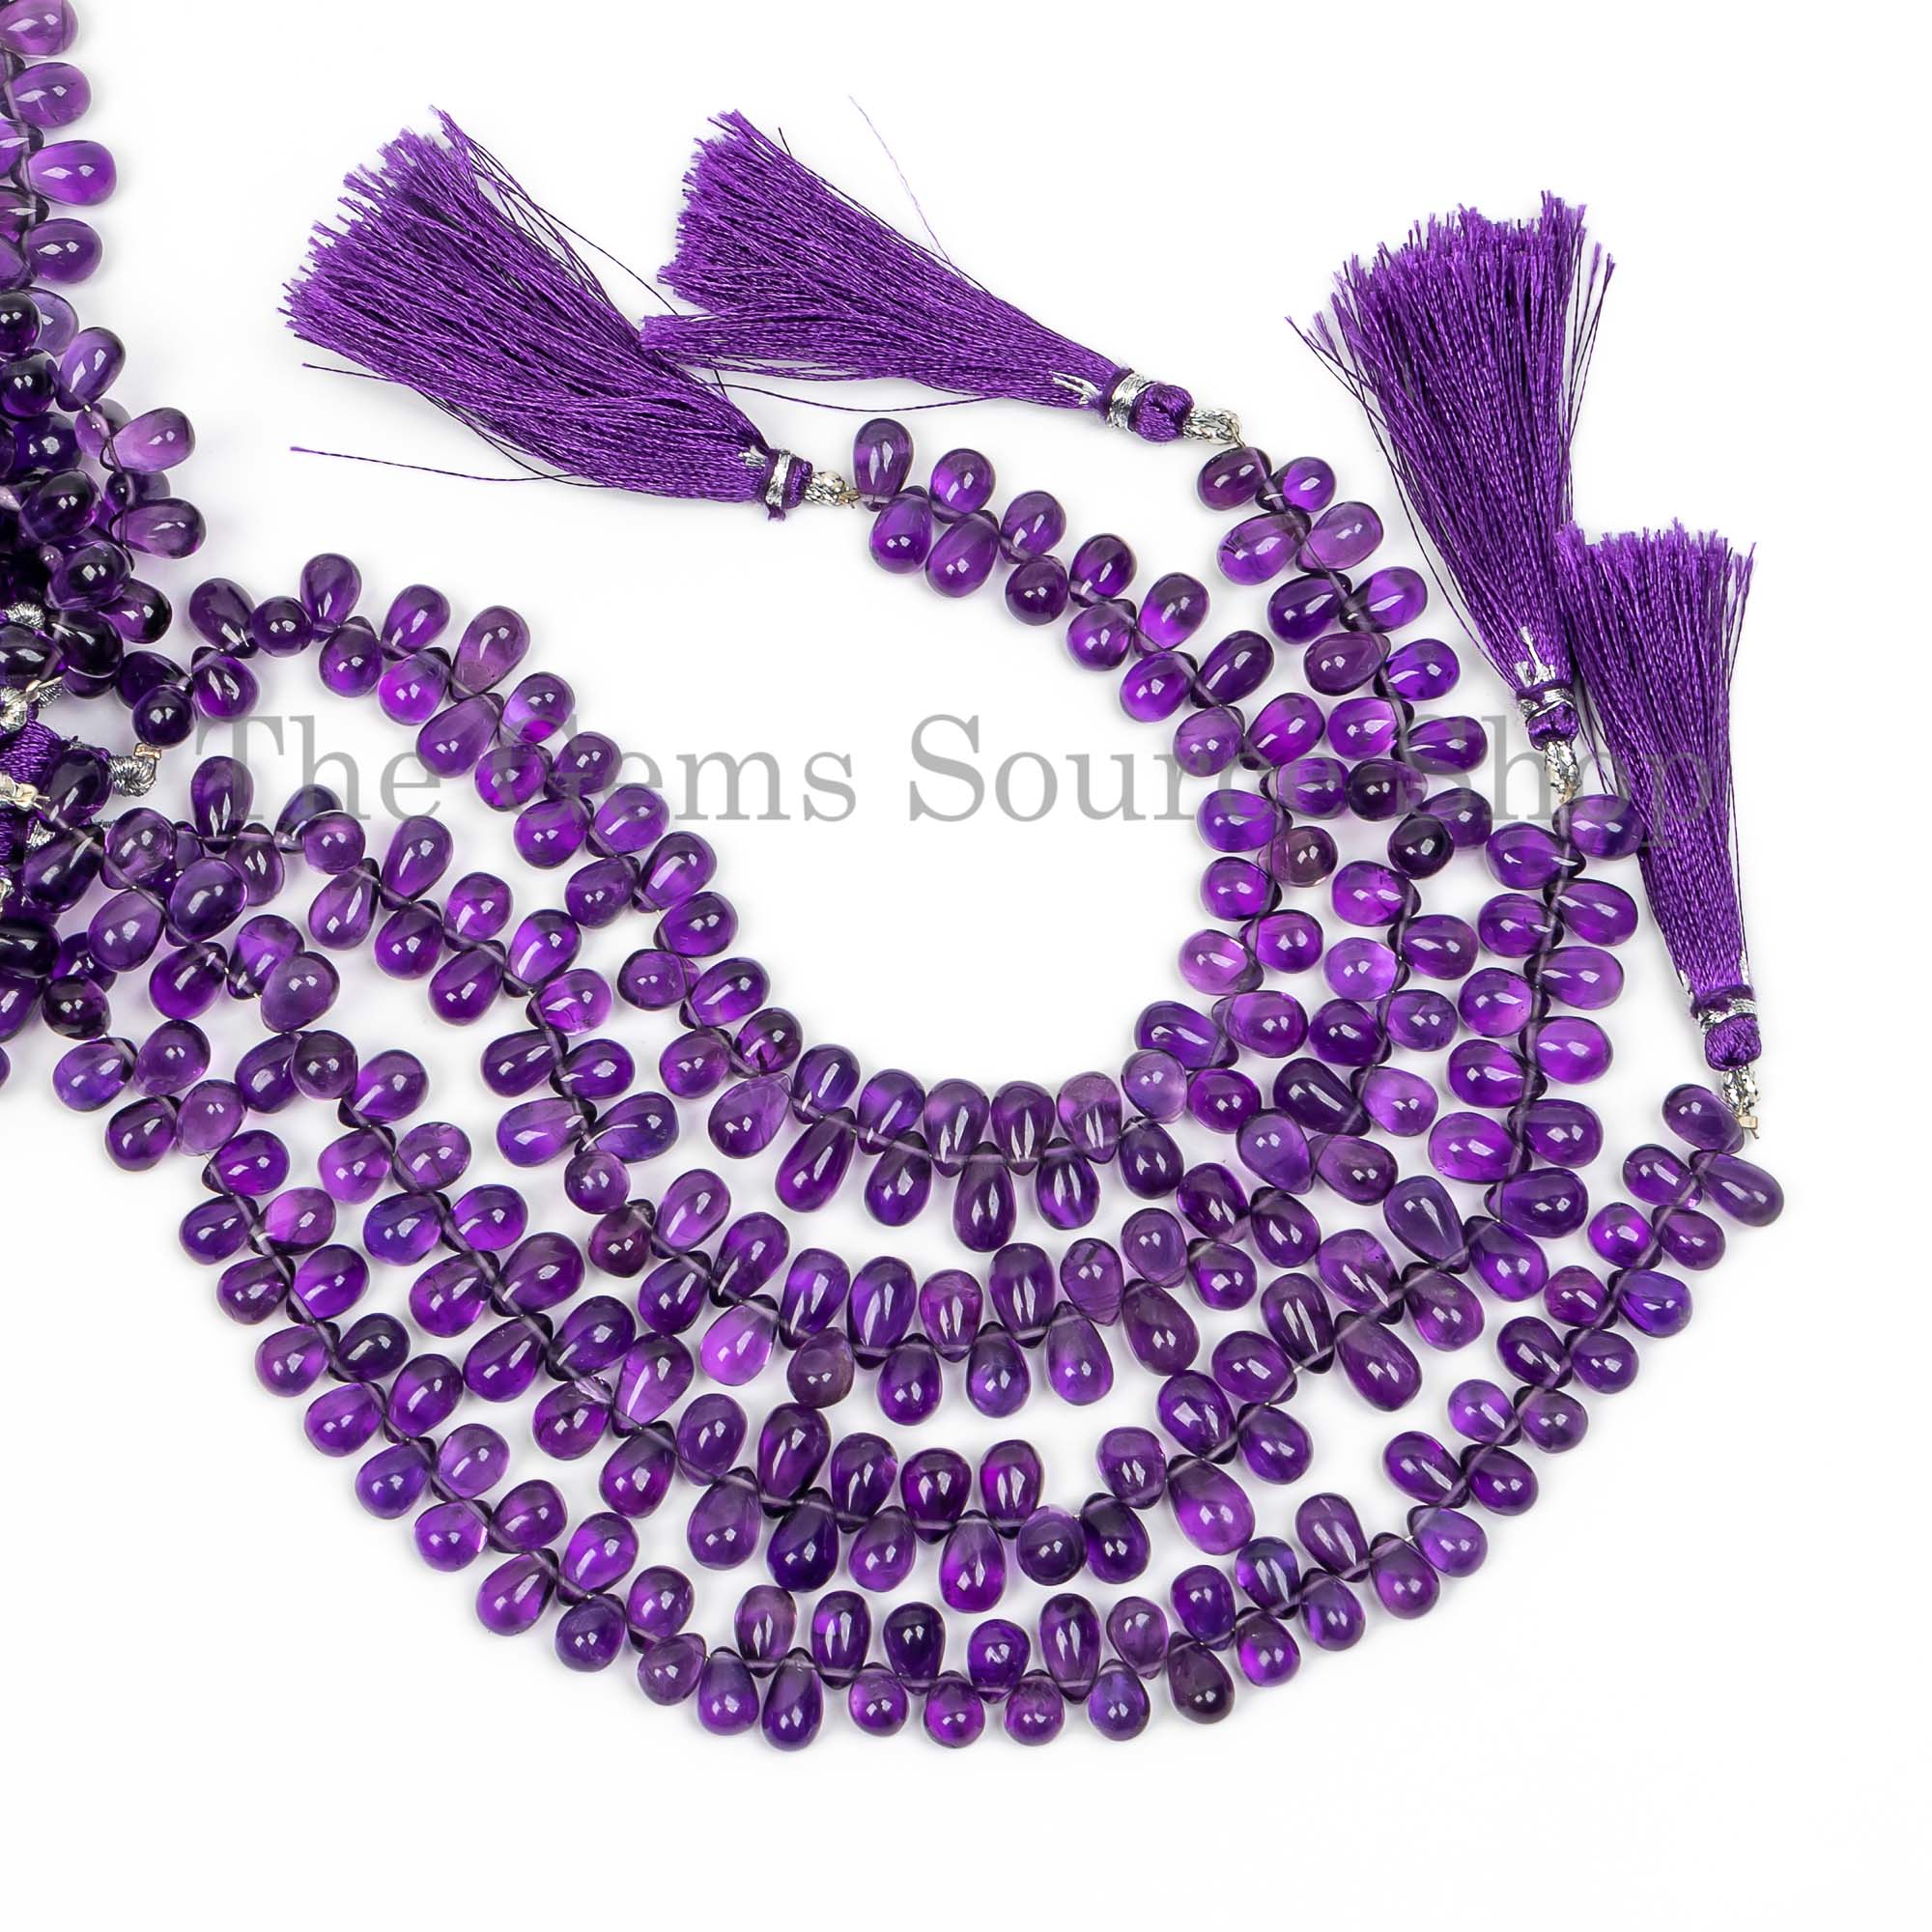 Natural Amethyst Beads, Amethyst Smooth Beads, Amethyst Drop Shape Beads, Side Drill Drop Beads